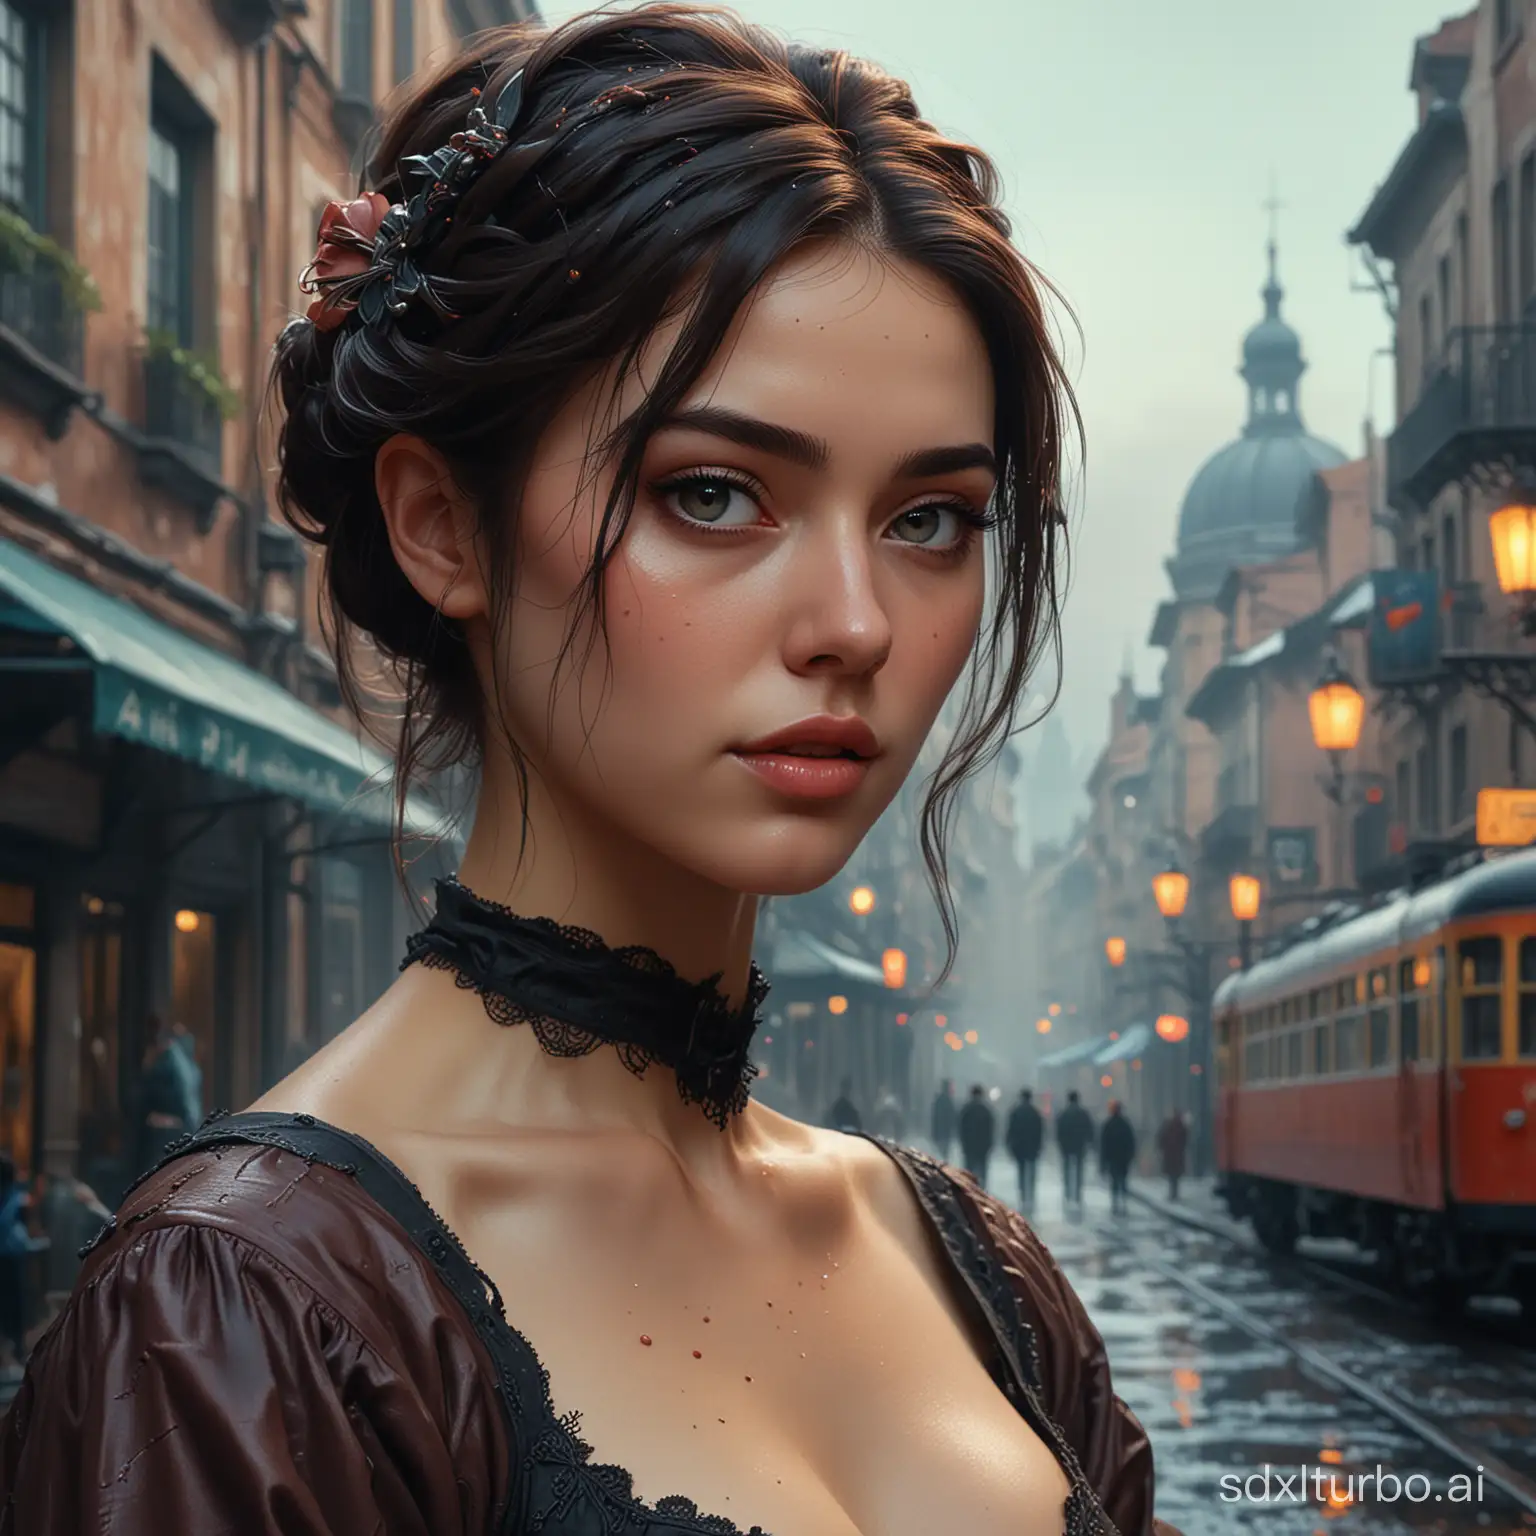 Countess on medieval streets, rococo Baroque, Beautiful and Intricately Detailed Insanely Detailed Octane Rendering Trending in Artstation, Black BG, Artistic Photography 8k, Octane Rendering, Photorealistic Concept Art, Perfect Light, Cinematic Smooth Natural Volume, Light-Dark, Award-Winning Photography, Artwork- press, bold colors, contrast, oil on canvas, raphael, caravaggio, greg rutkowski, beeple, beksinski, giger, Salvador Dalí, oil painting, heavy brushstrokes, paint drips, dramatic lighting, sharp focus, studio shot, intricate details highly detailed, by greg rutkowski, unreal engine, loish, rhads, beeple, makoto shinkai and lois van baarle, ilya kuvshinov, rossdraws, tom bagshaw, alphonse mucha, global lighting, detailed and intricate environment, comic style, heavy brushstrokes, train station trending art, watercolor style, ambient neon, abstract black oil, tinder wick, detailed acrylic, grunge, intricate complexity, rendered in unreal engine, photorealistic, neon ambient, abstract black oil, tinder wick, detailed acrylic, grunge, photorealistic complexity, oil painting, heavy strokes, dripping paint, [Cine movie scene still intricately detailed], cinematic realism, [Missing film style], strong RGB color tones, high action pose, badass location, busy, insanely detailed [dirty], [cluttered], chaos, perfect pupils, insanely detailed faces, intricately detailed location, film grain, HD, 8k, volumetric lighting, chiaroscuro, sfumato, [dim lit], cool colors, hair background, ear backlight, volumetric lighting, 8K, perfect eyes, perfect pupils, expressive eyes, smoke, particle fx, art by Vladimir Kush, kids story book style, muted colors, watercolor style, Miki Asai Macro photography, close-up, hyper detailed, trending on artstation, sharp focus, studio photo, intricate details, highly detailed, by greg rutkowski